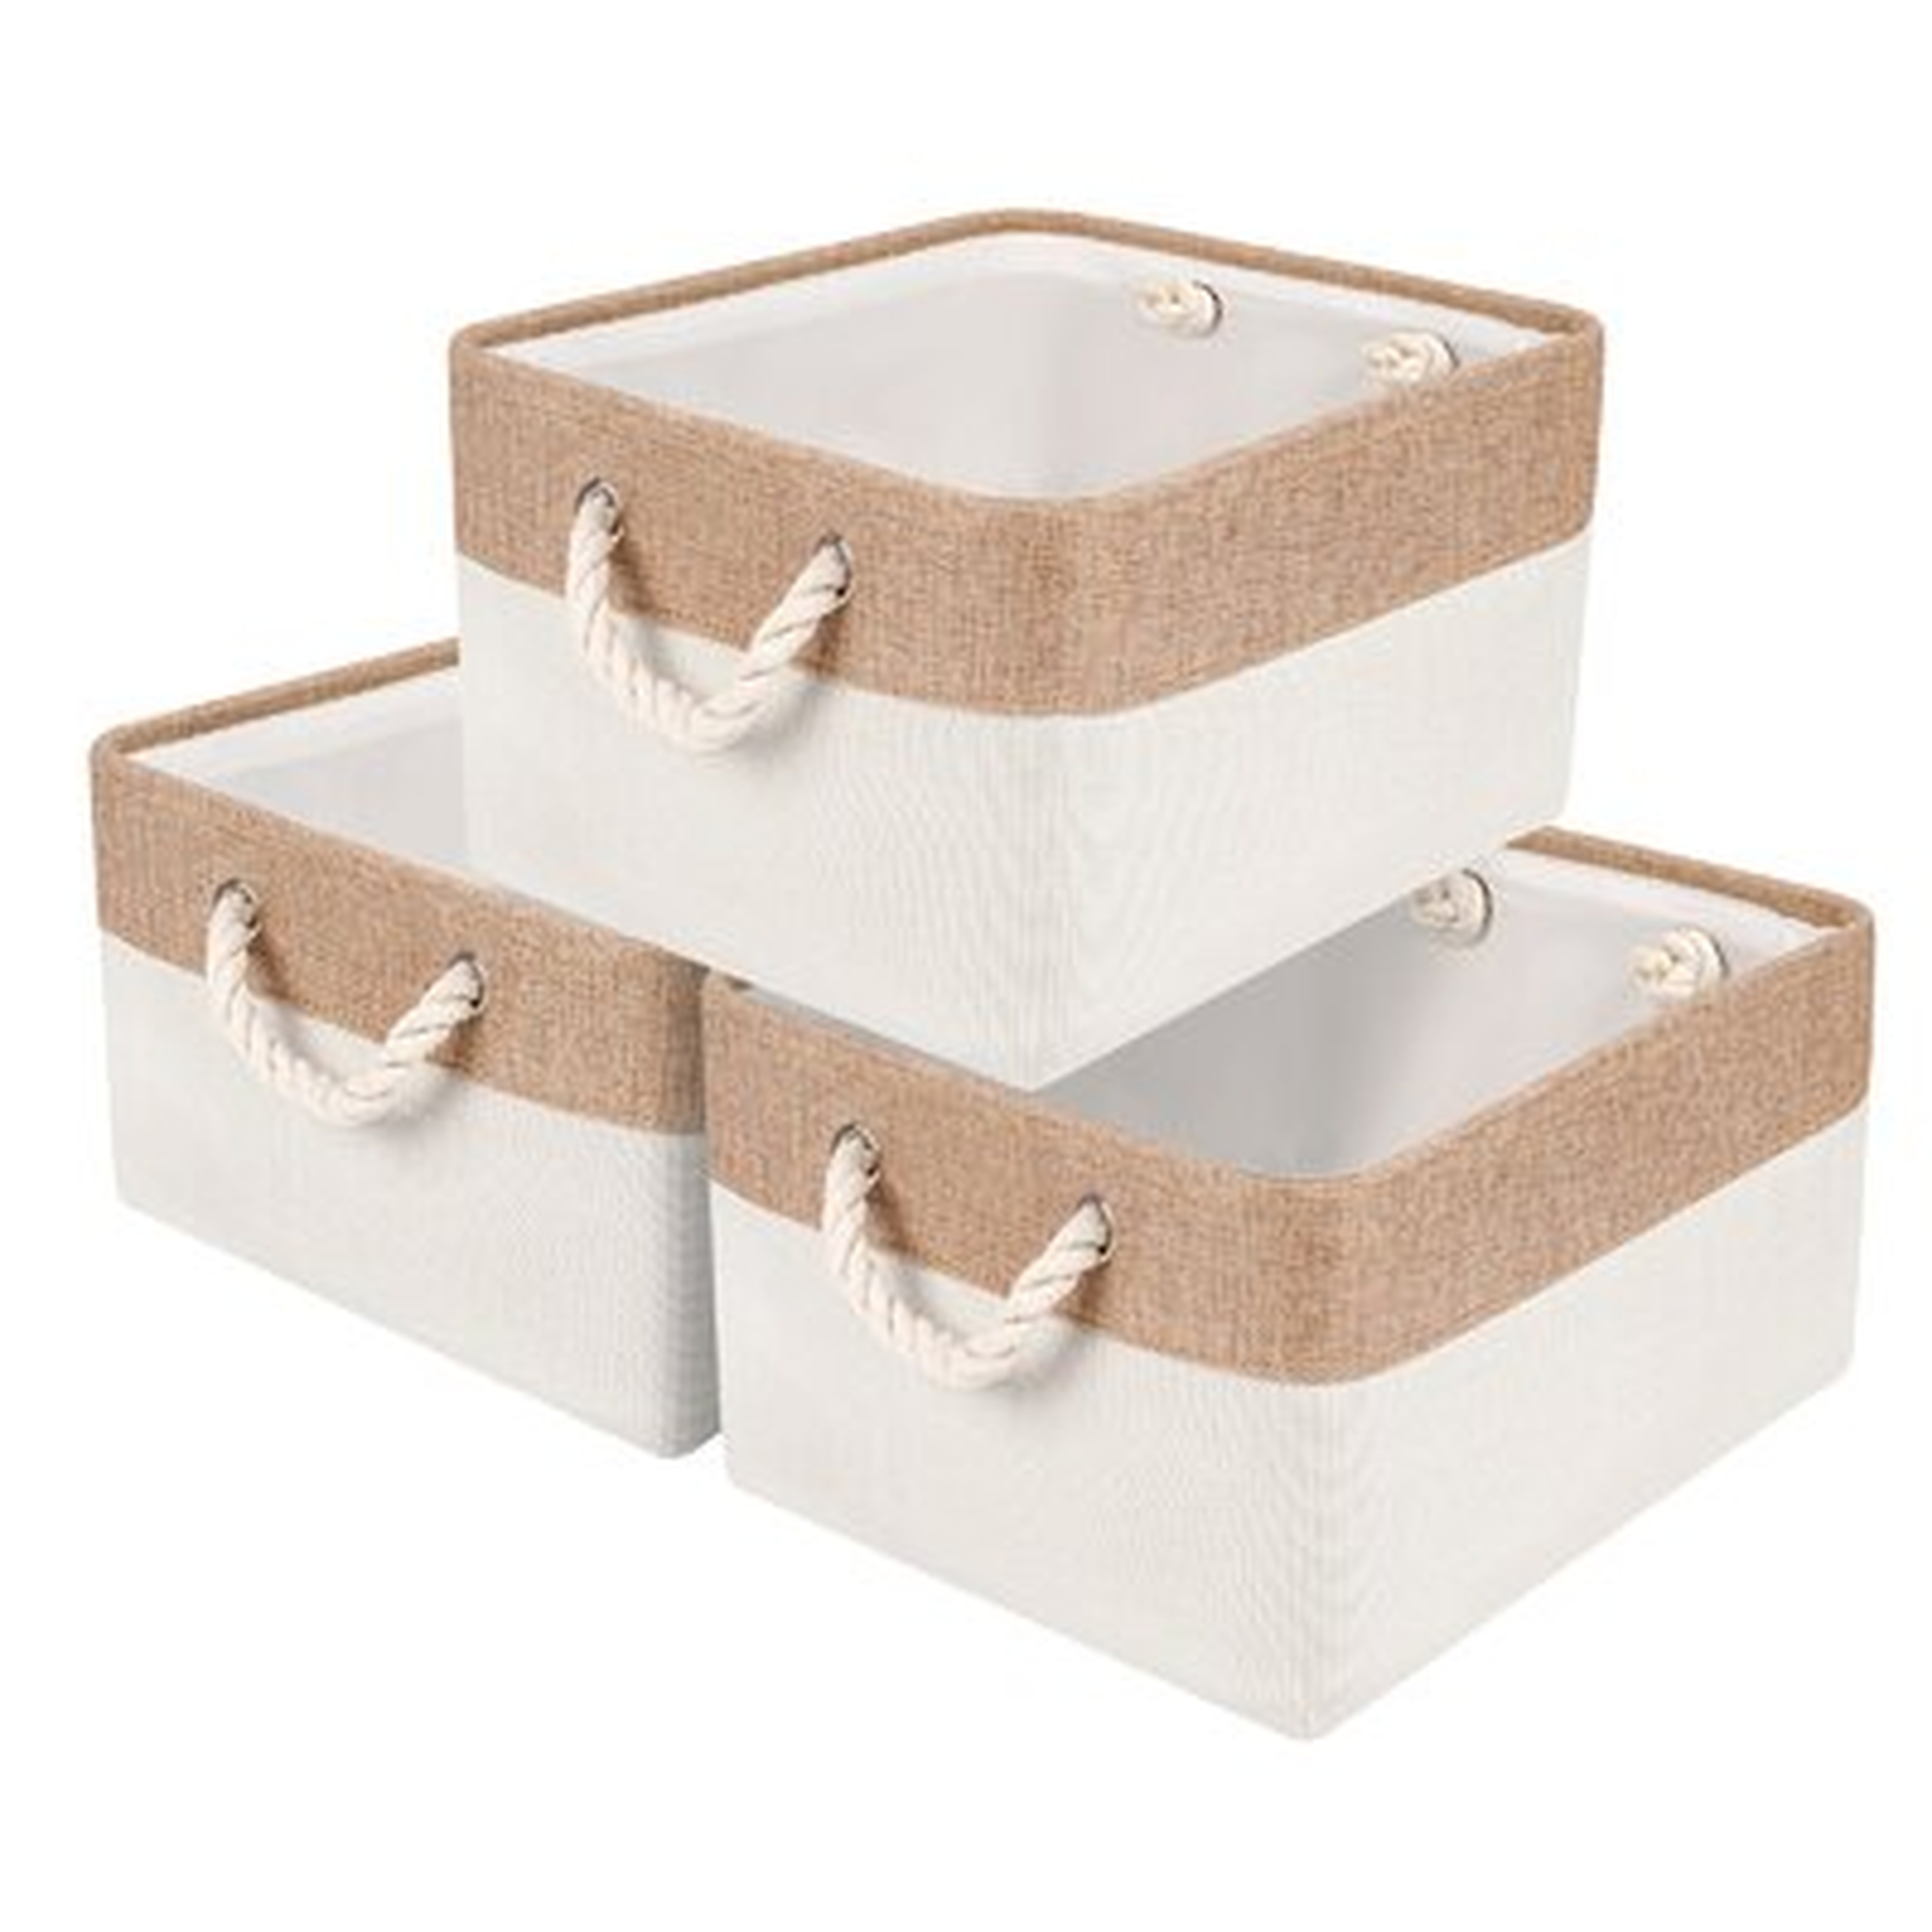 Decorative Fabric Storage Baskets With Rope Handles For Kids Storage(Set Of 3) - Wayfair